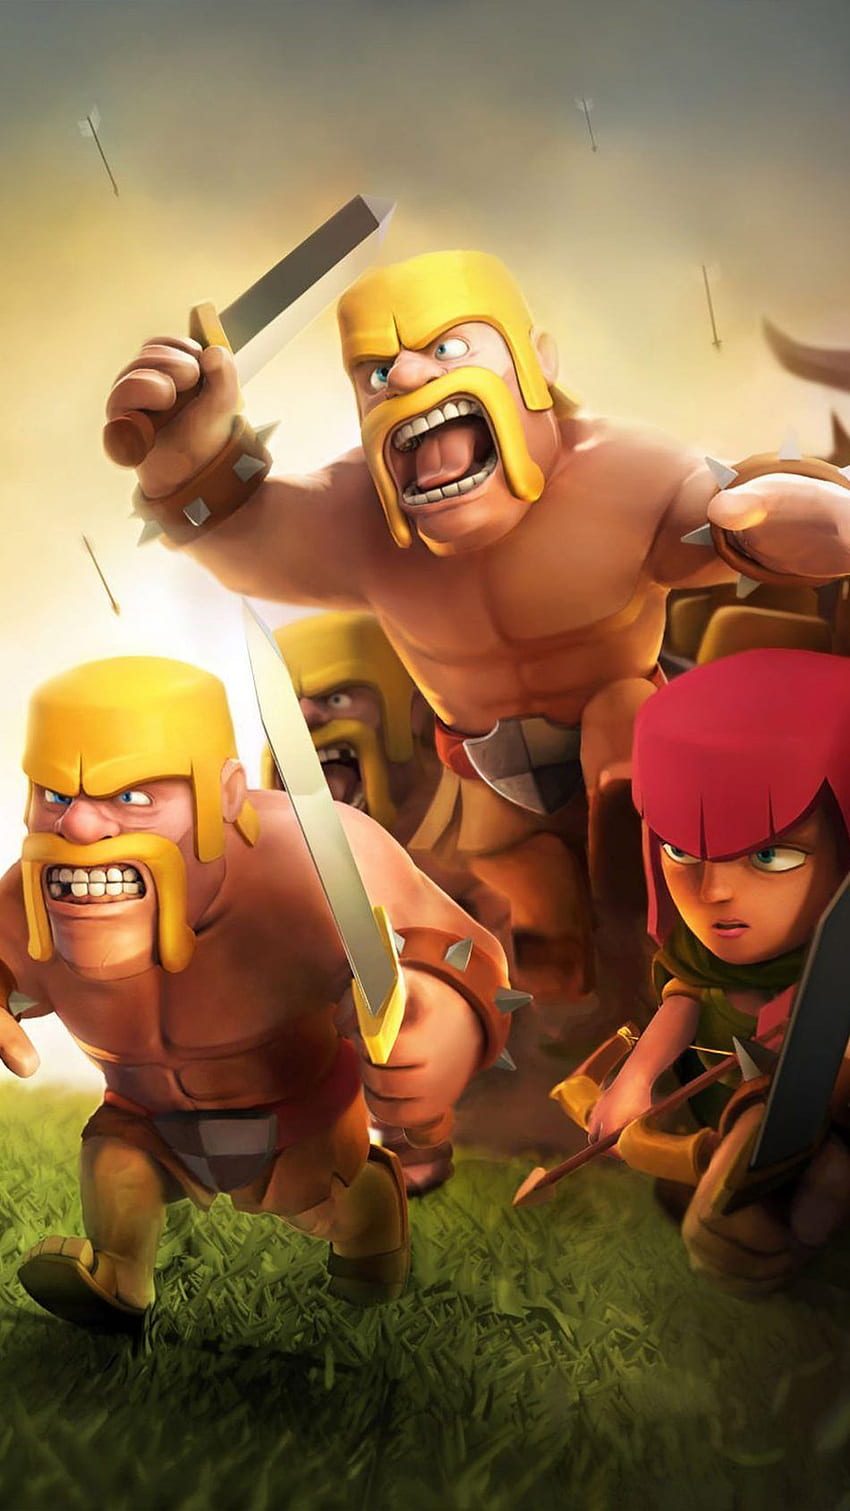 Clash of Clans Mobile Game Ultra Mobile . Clash of clans, Clash of clans game, Dragon clash of clans, Clash of Clans Phone HD phone wallpaper